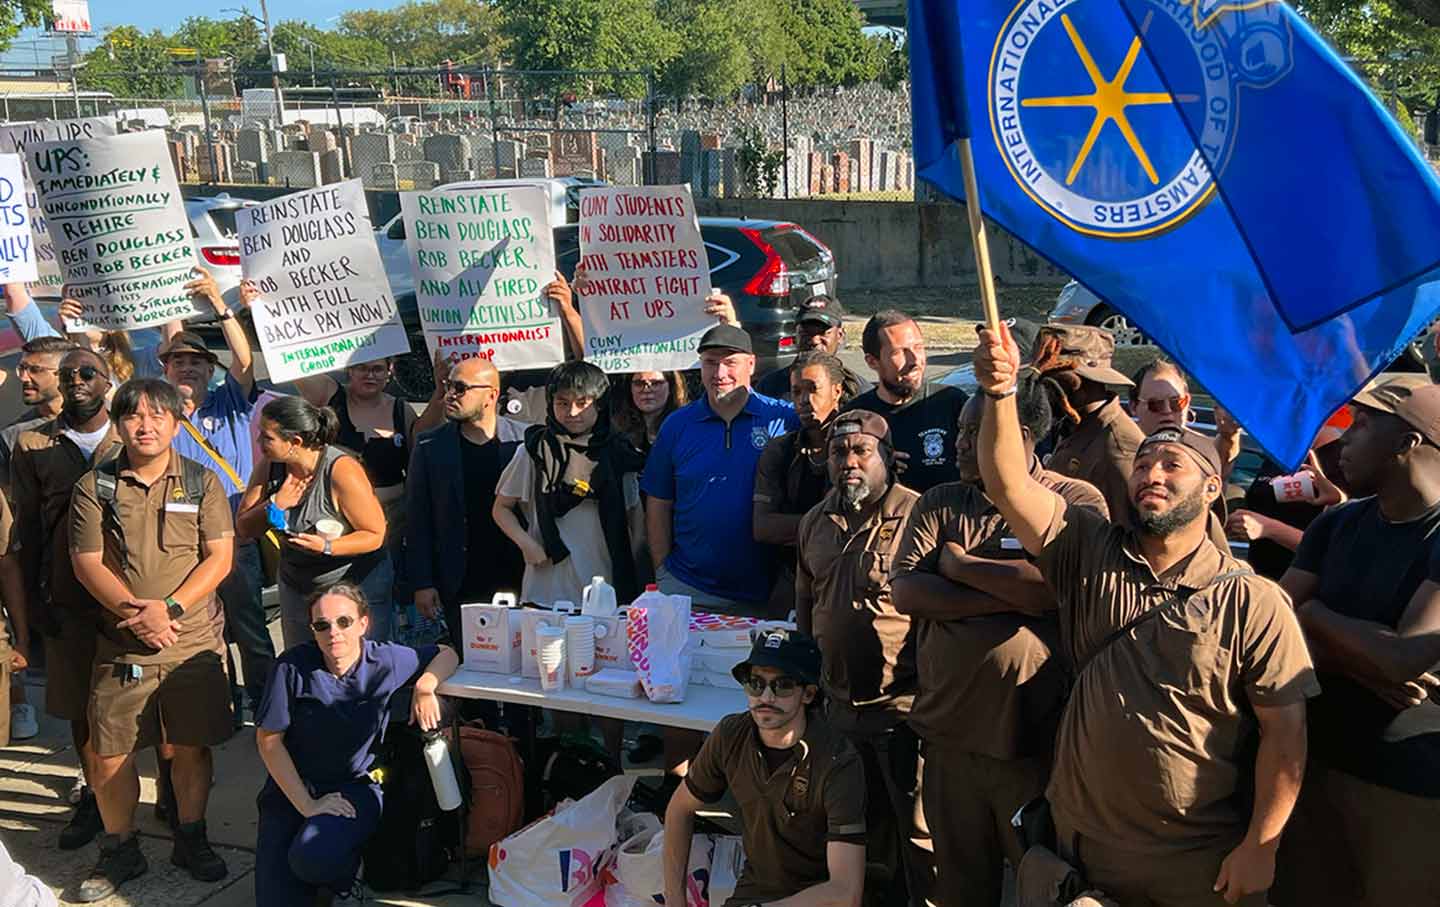 UPS workers in their brown uniforms rally